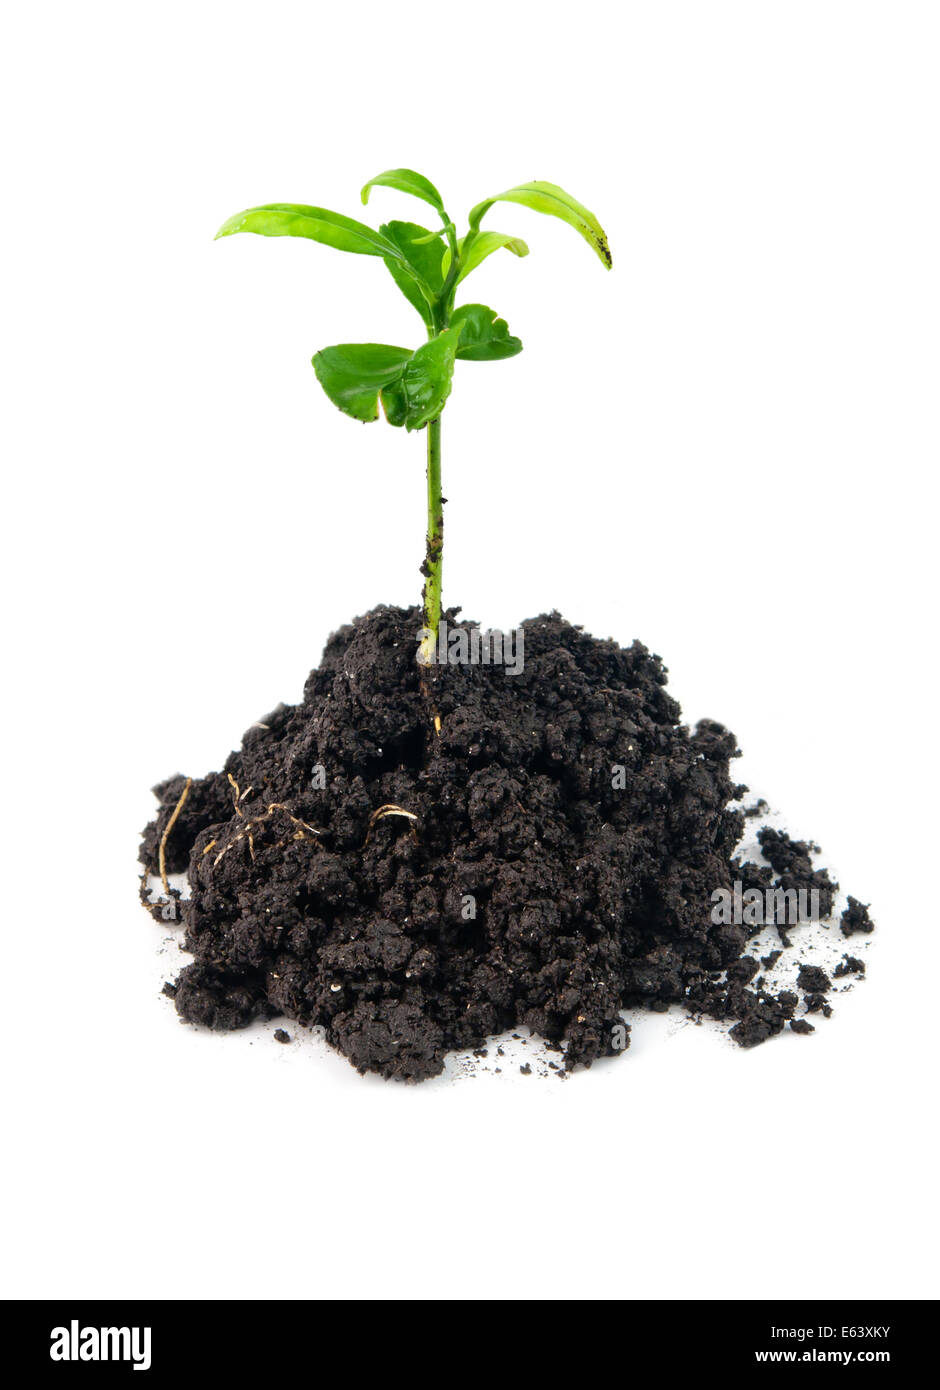 young green plant in soil isolated on white Stock Photo